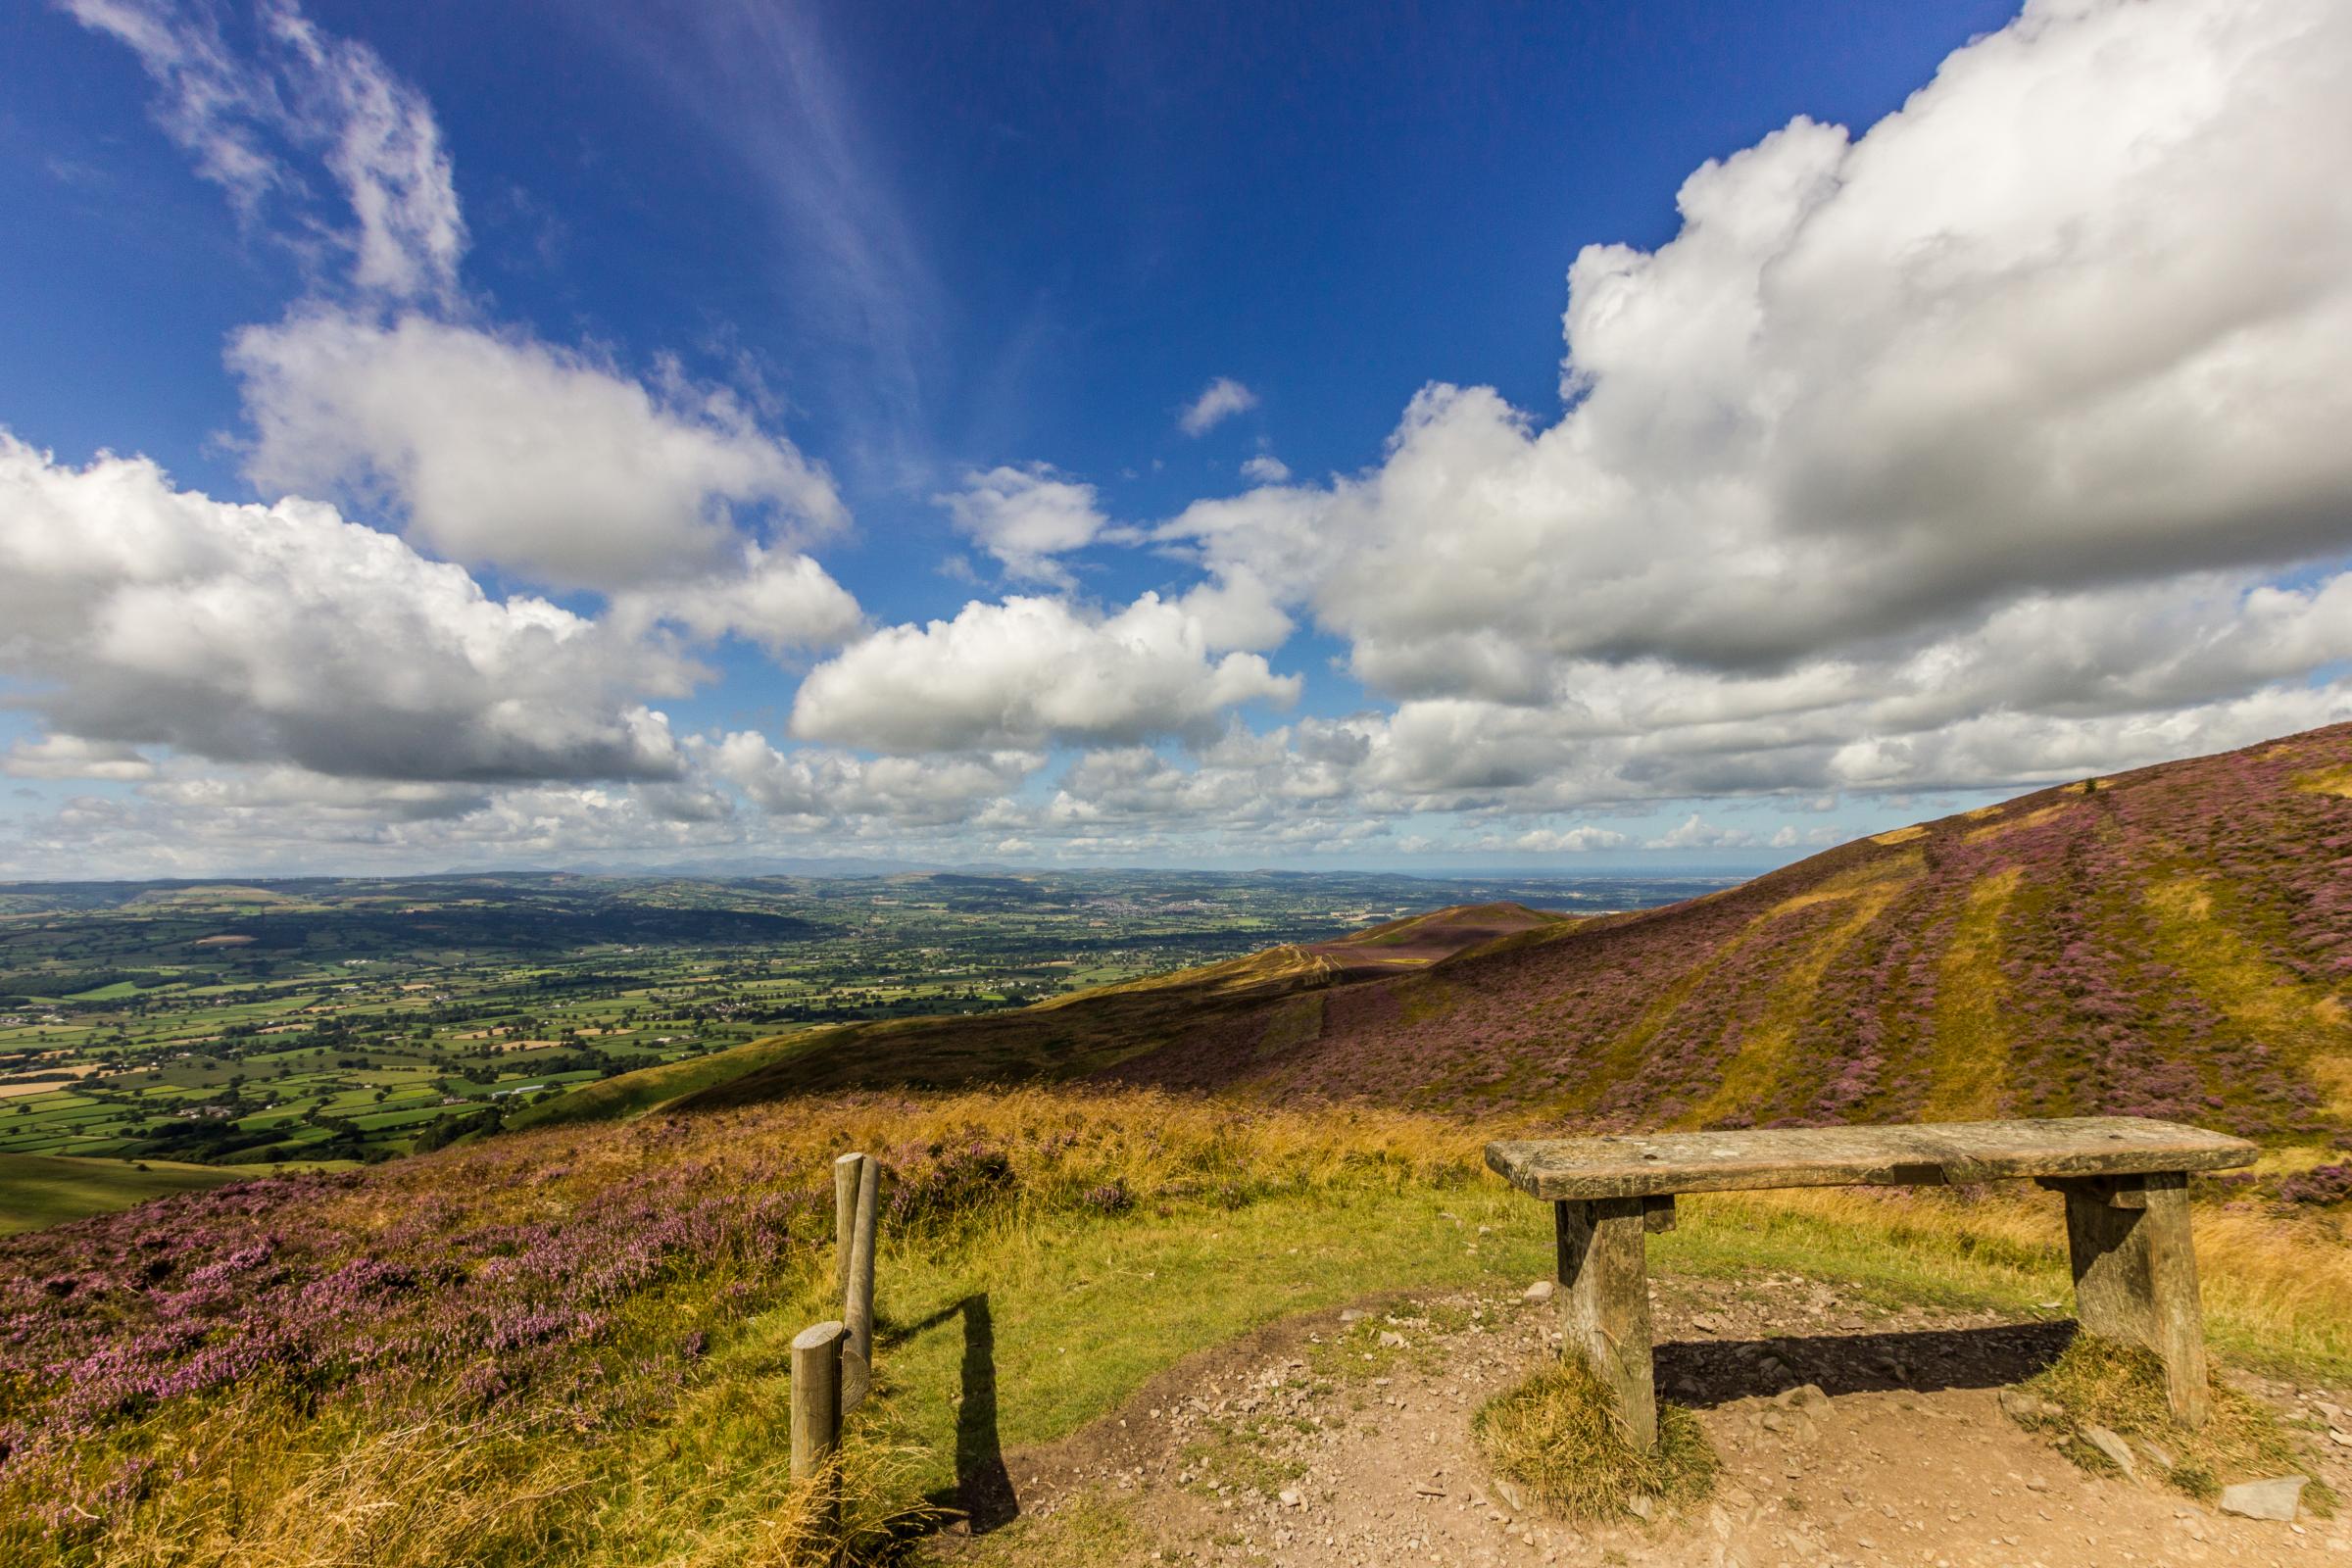 A view of the Vale of Clwyd from the slopes of Moel Famau in North Wales..